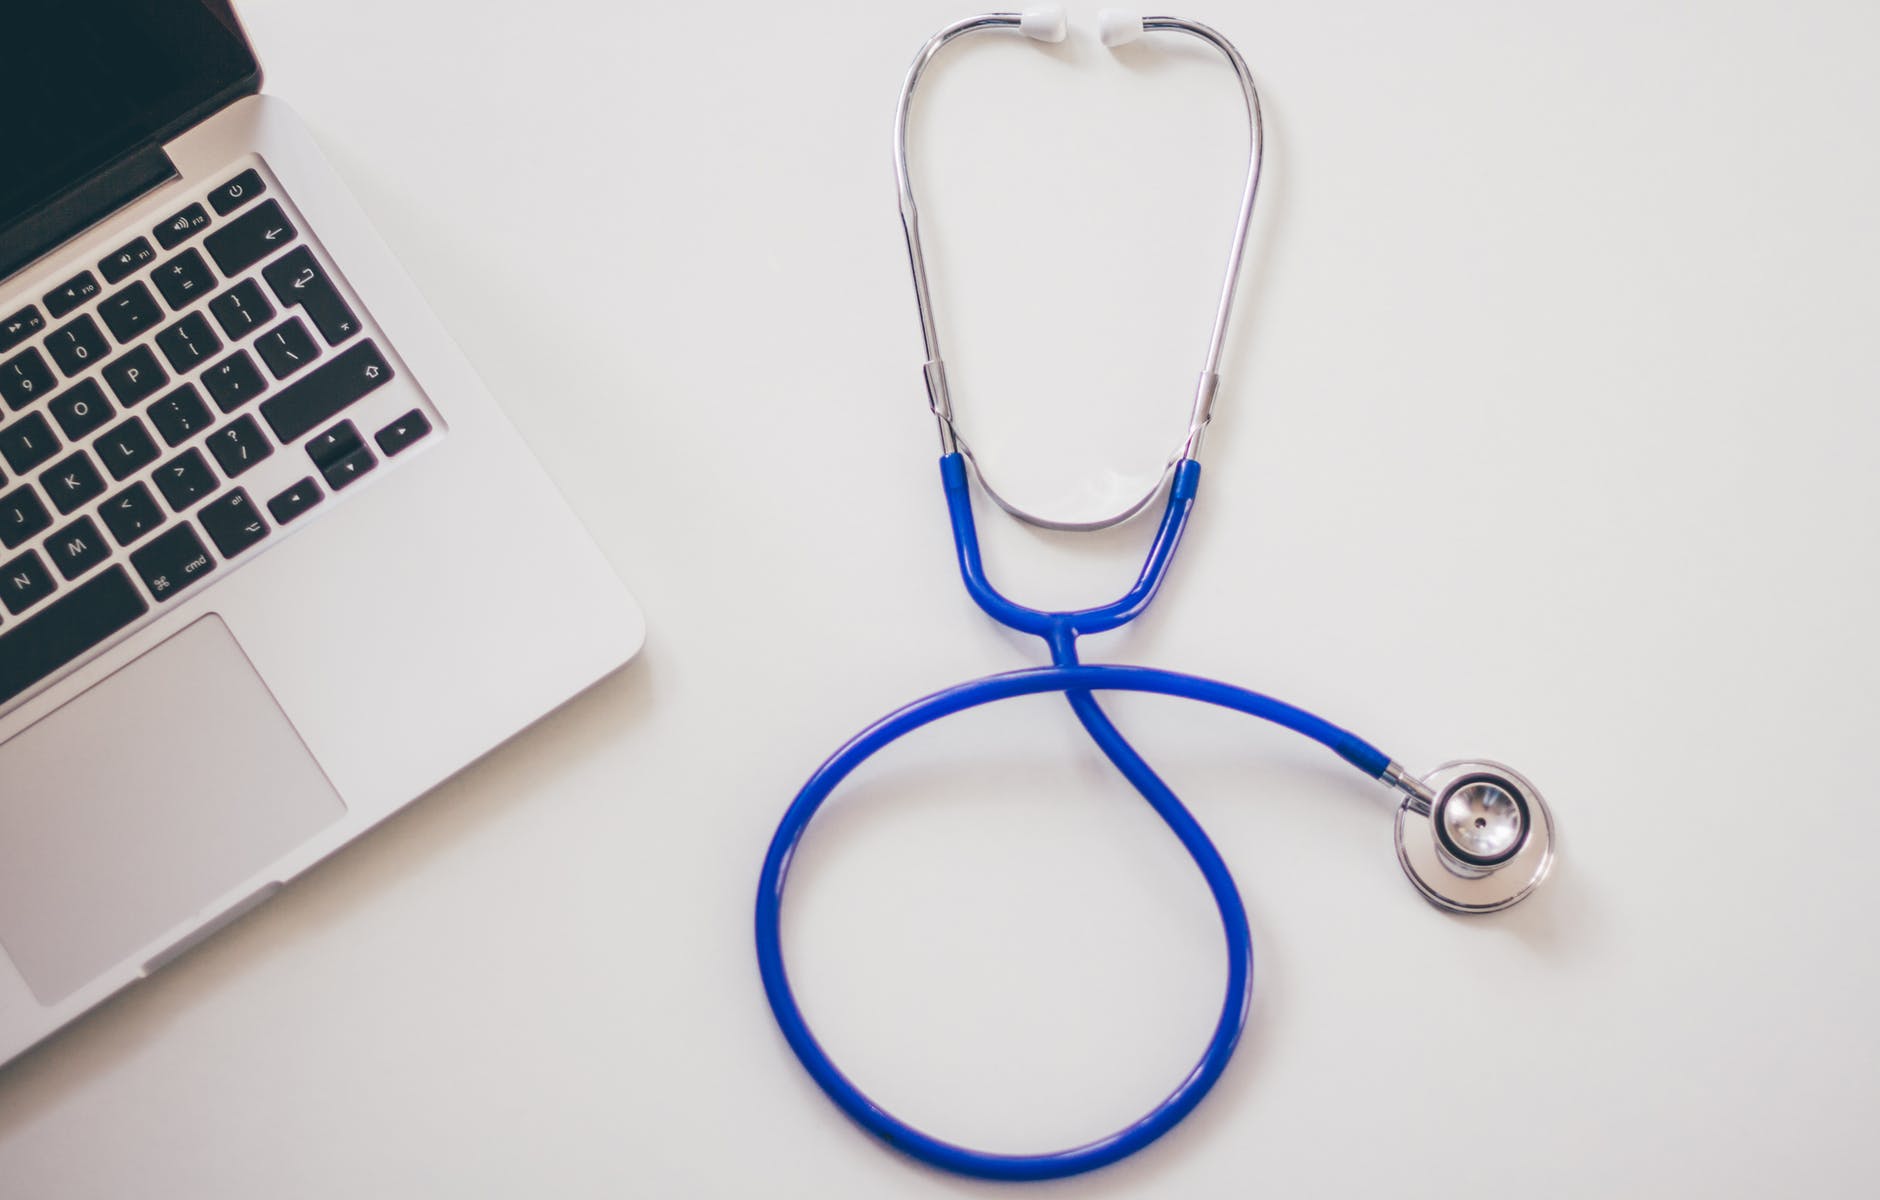 Image of a stethoscope and laptop keyboard.